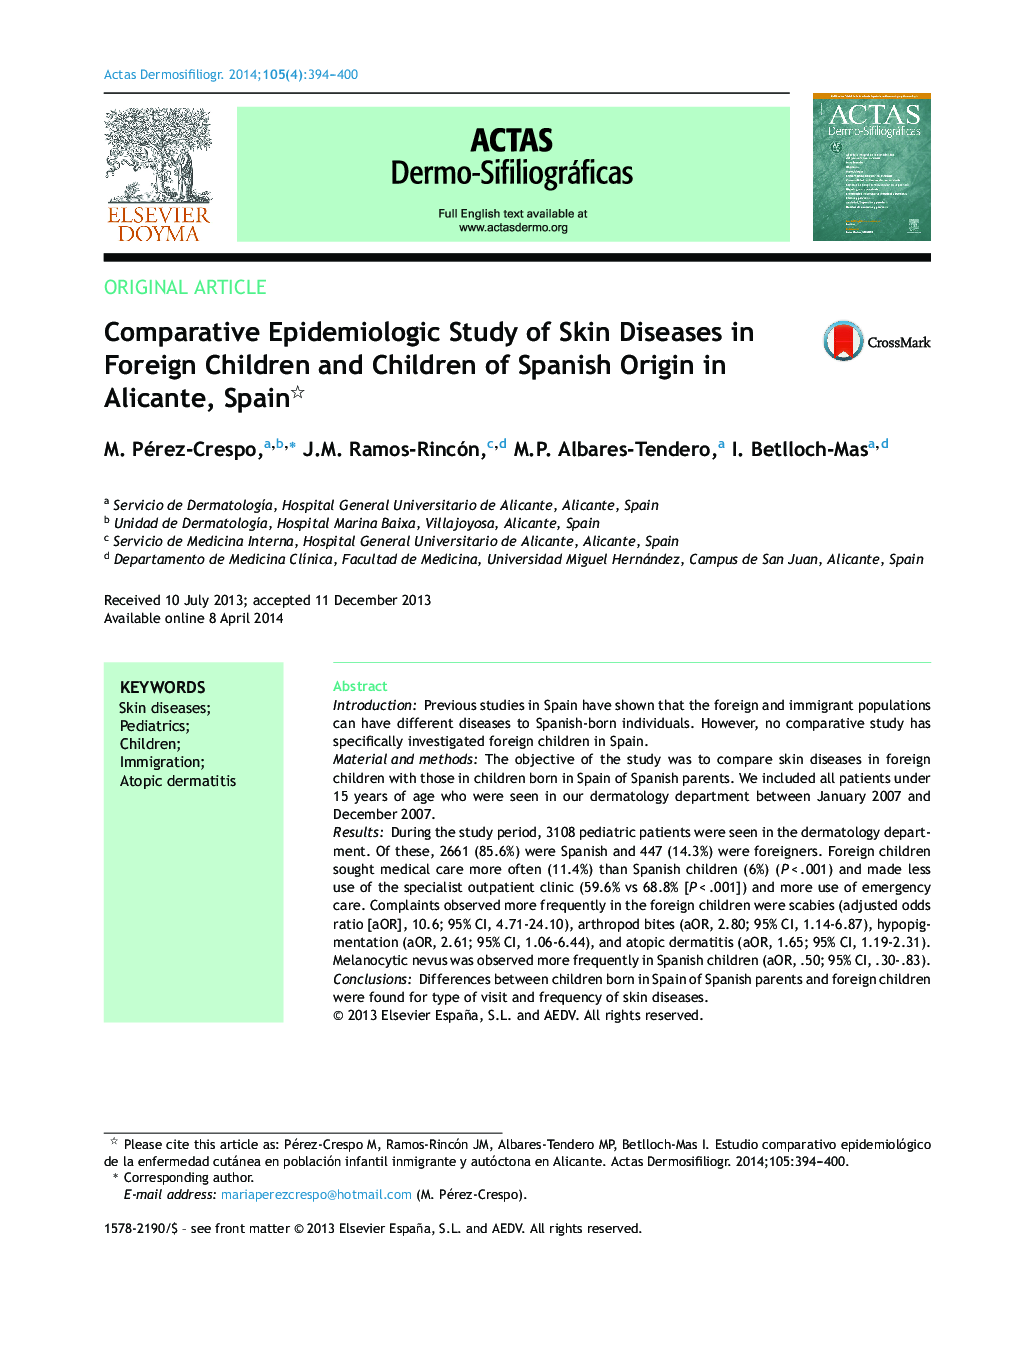 Comparative Epidemiologic Study of Skin Diseases in Foreign Children and Children of Spanish Origin in Alicante, Spain 